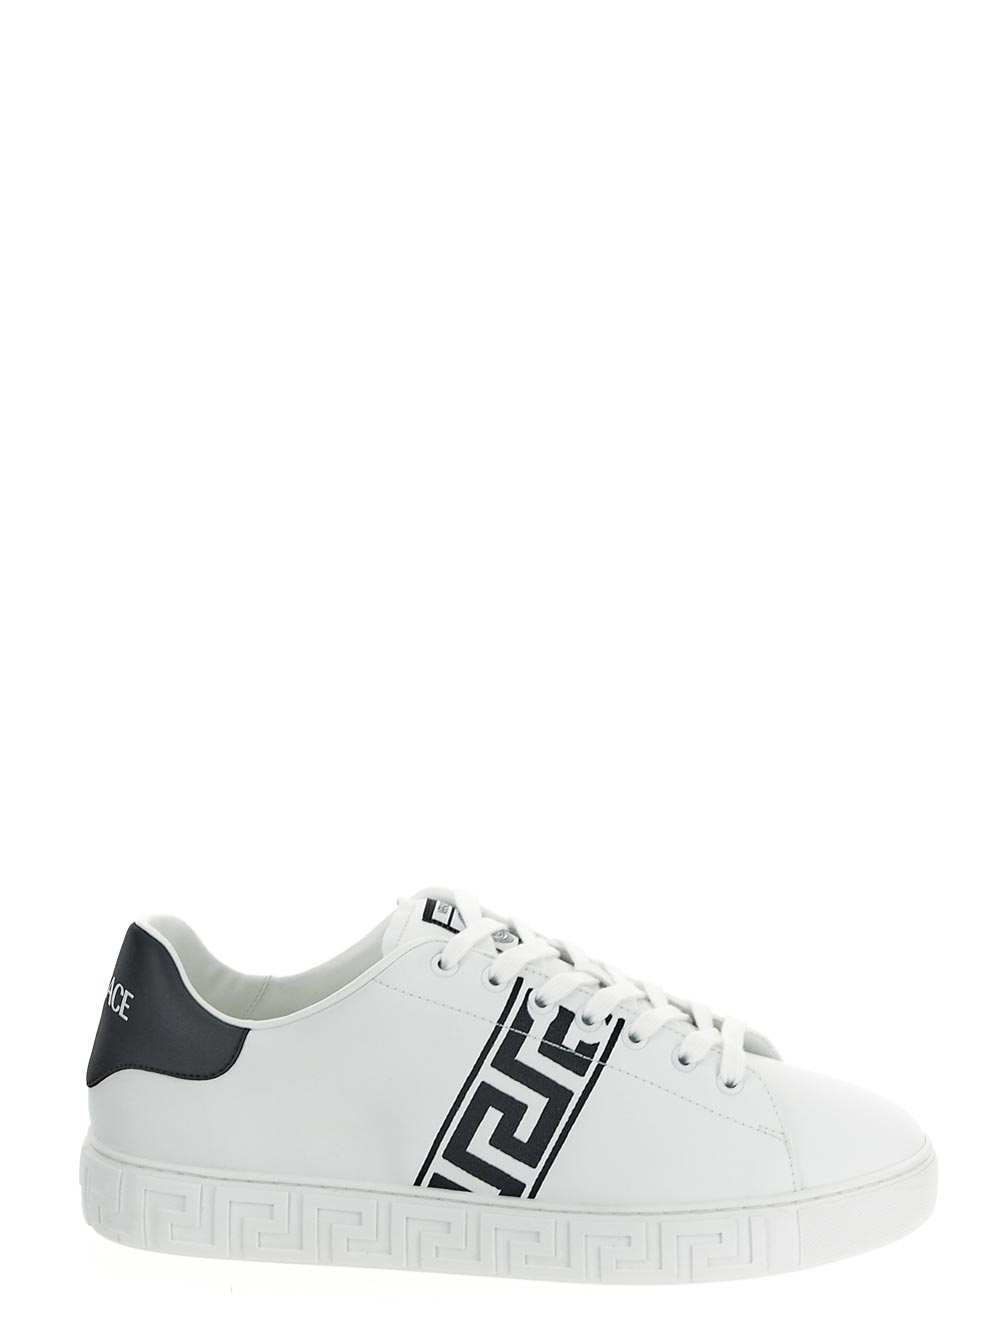 Versace Embroidered Greca Sneakers